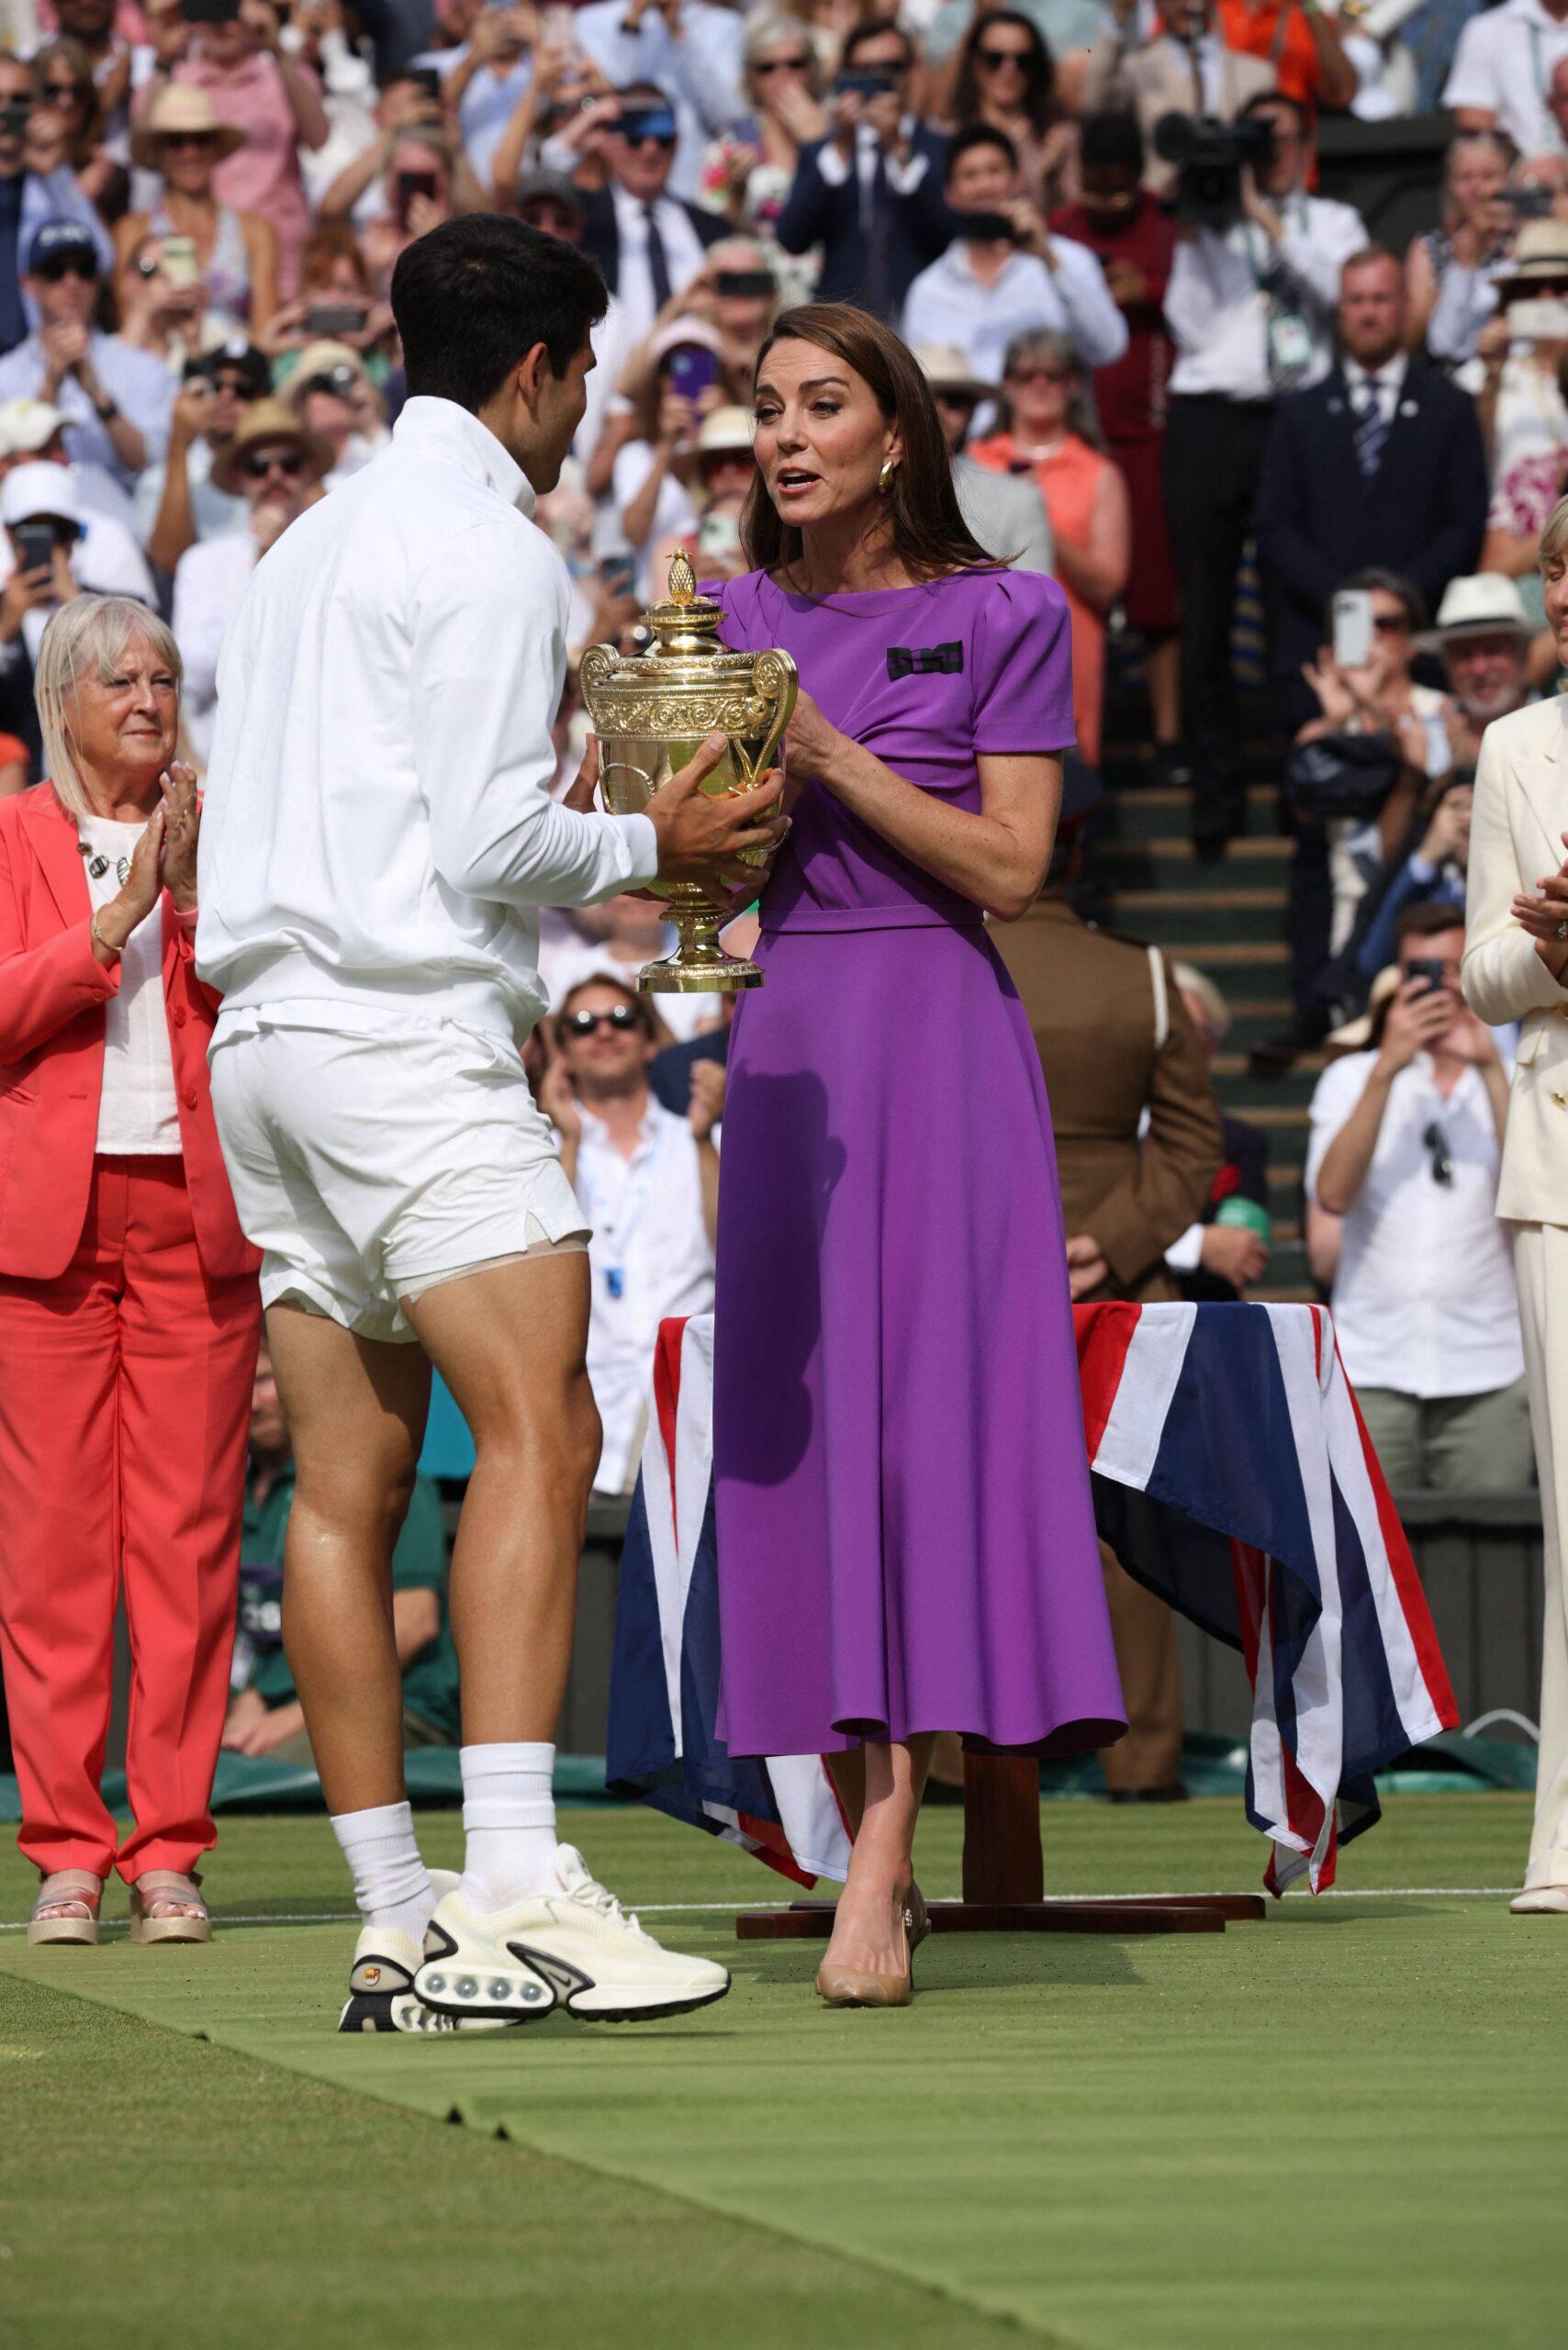 Catherine, Princess of Wales (Kate Middleton), Patron of The AELTC, presents the Gentlemen's Singles Trophy to Carlos Alcaraz of Spain following his victory at the 2024 Wimbledon men's final